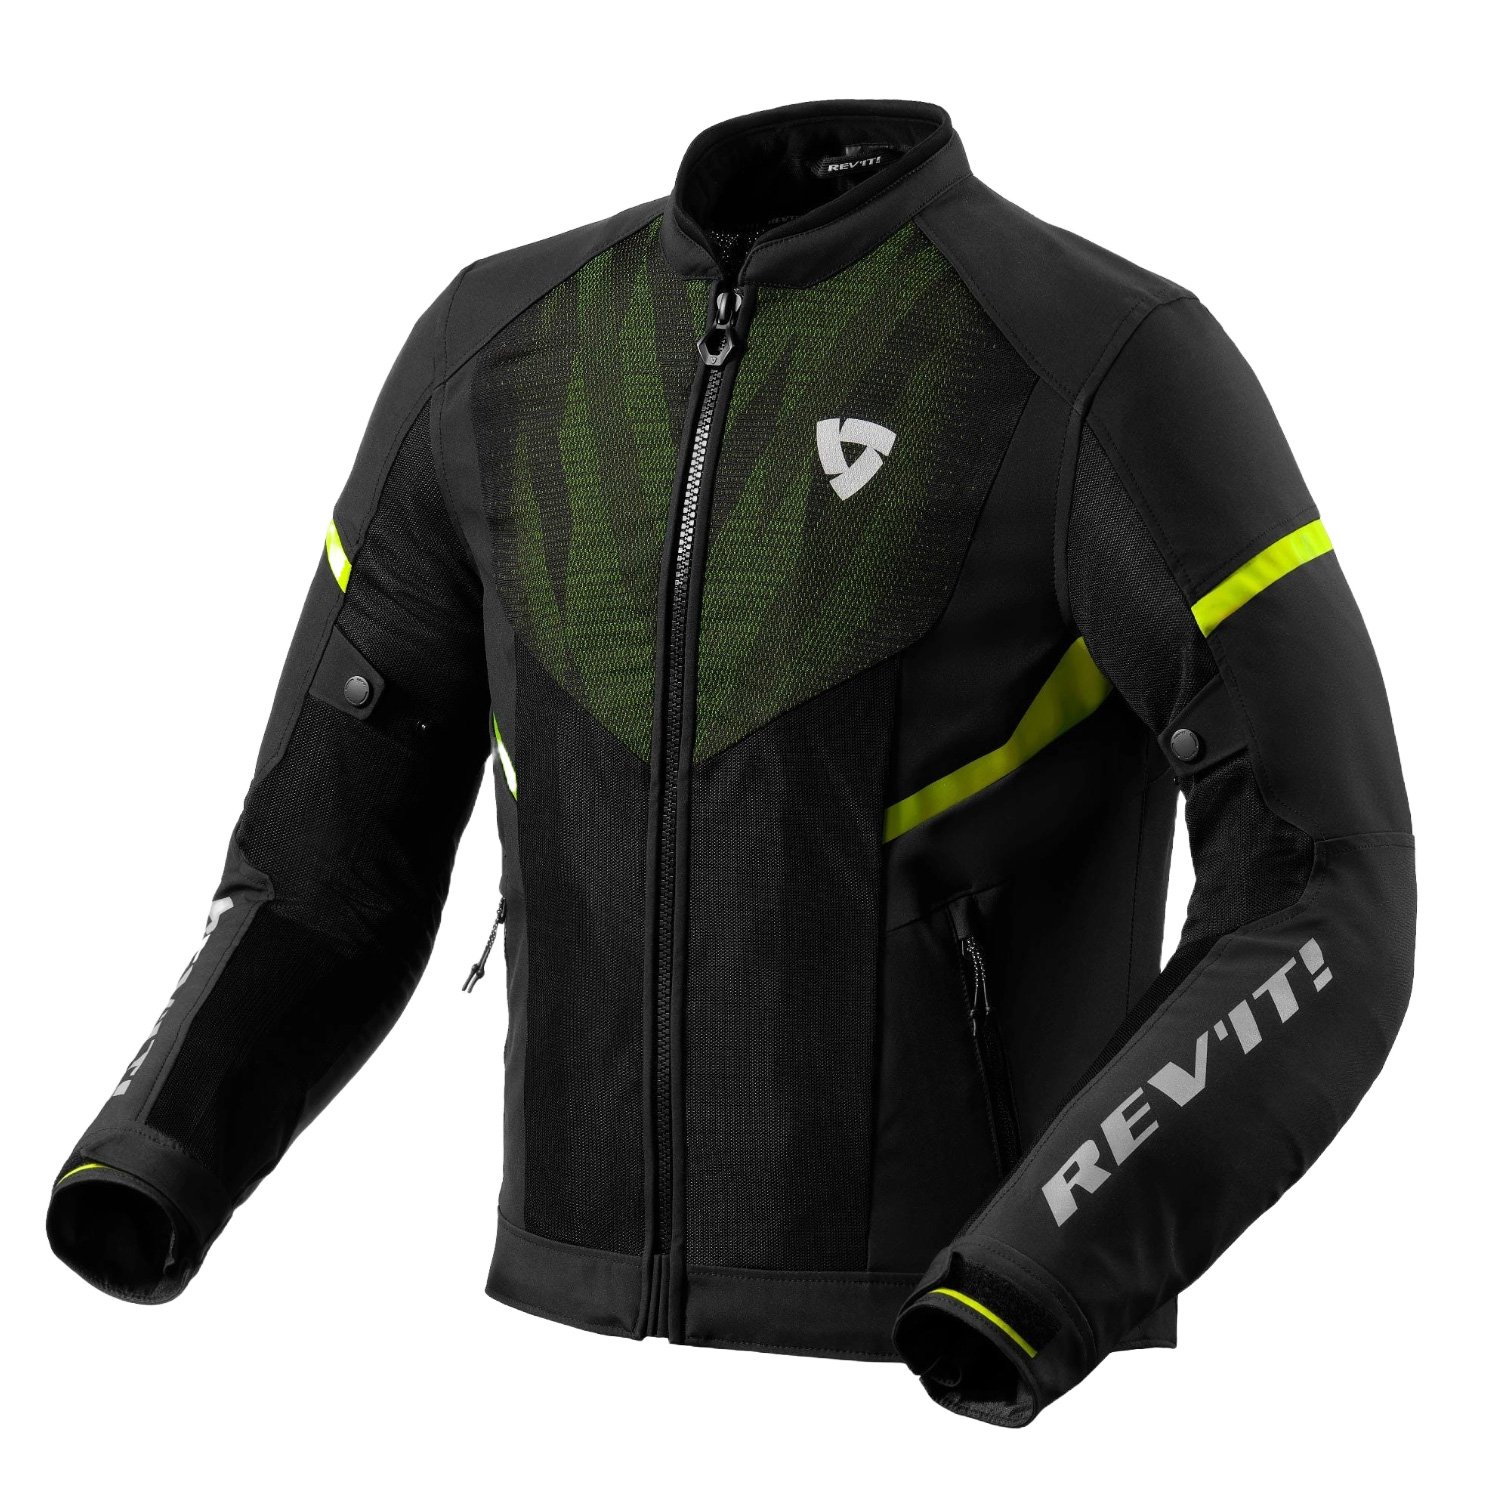 Image of REV'IT! Hyperspeed 2 GT Air Jacket Black Neon Yellow Talla 3XL